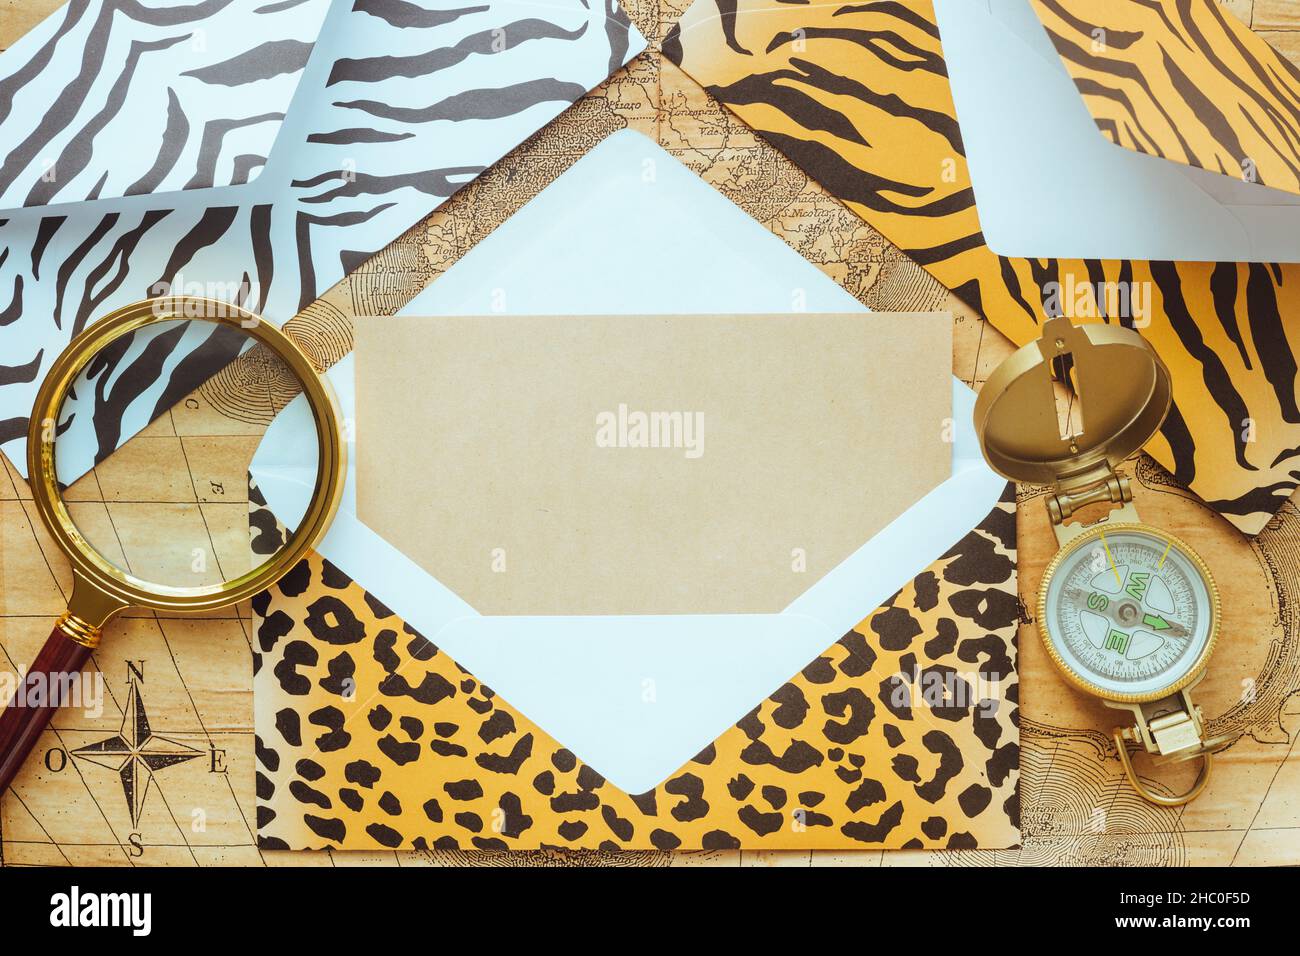 Envelopes with patterns of the skin of wild animals of tiger, jaguar, zebra with a magnifying glass and compass on the background of an old stylish ma Stock Photo